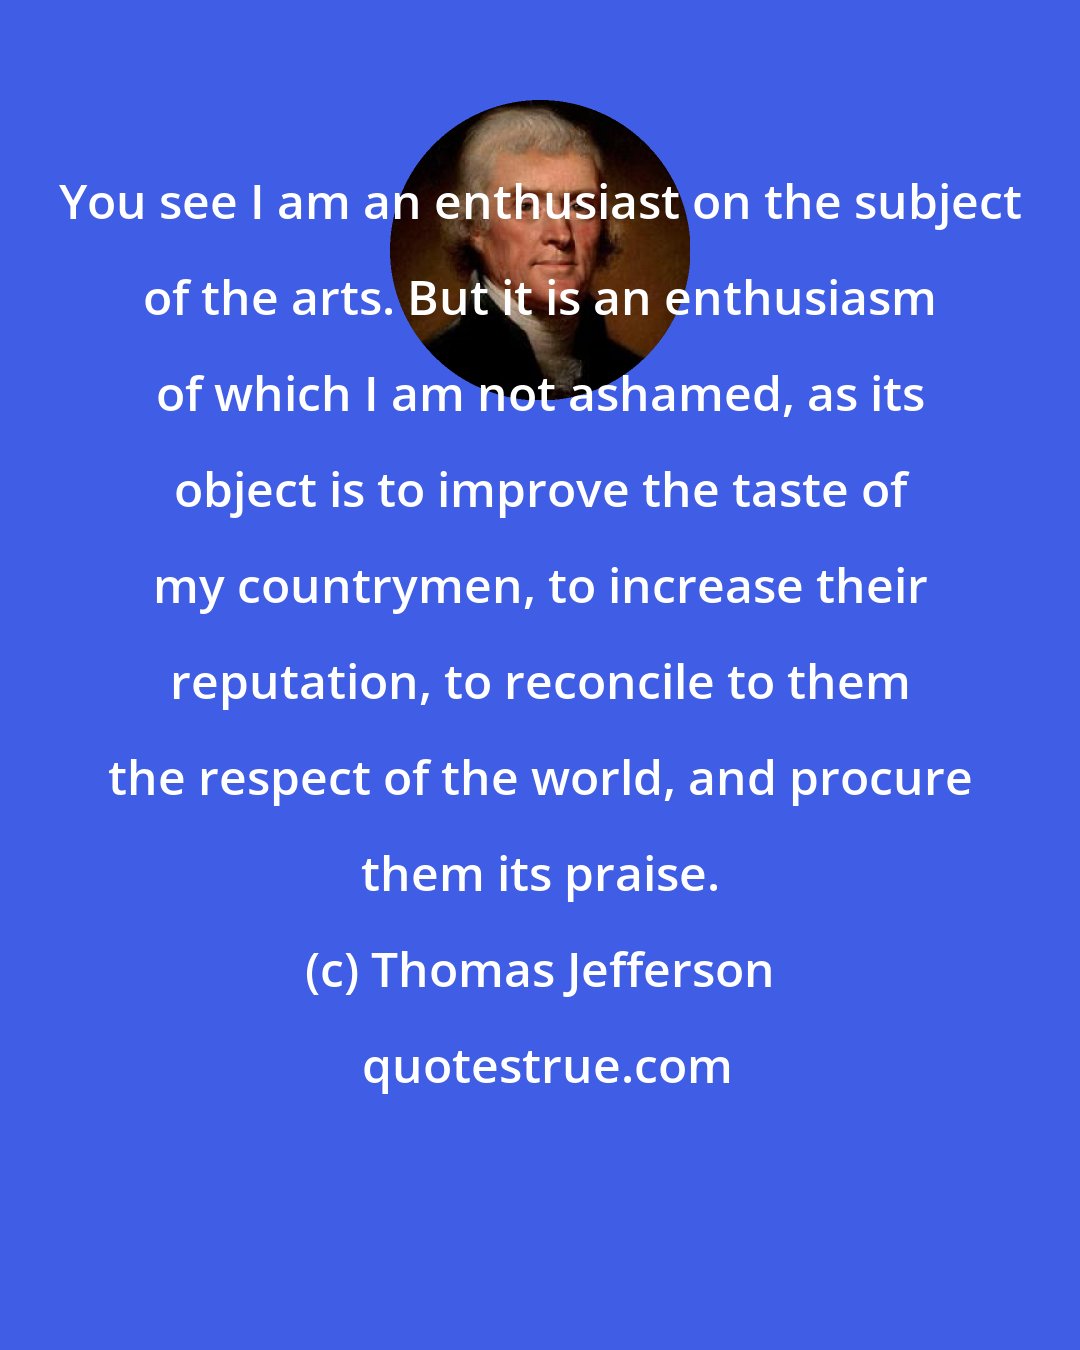 Thomas Jefferson: You see I am an enthusiast on the subject of the arts. But it is an enthusiasm of which I am not ashamed, as its object is to improve the taste of my countrymen, to increase their reputation, to reconcile to them the respect of the world, and procure them its praise.